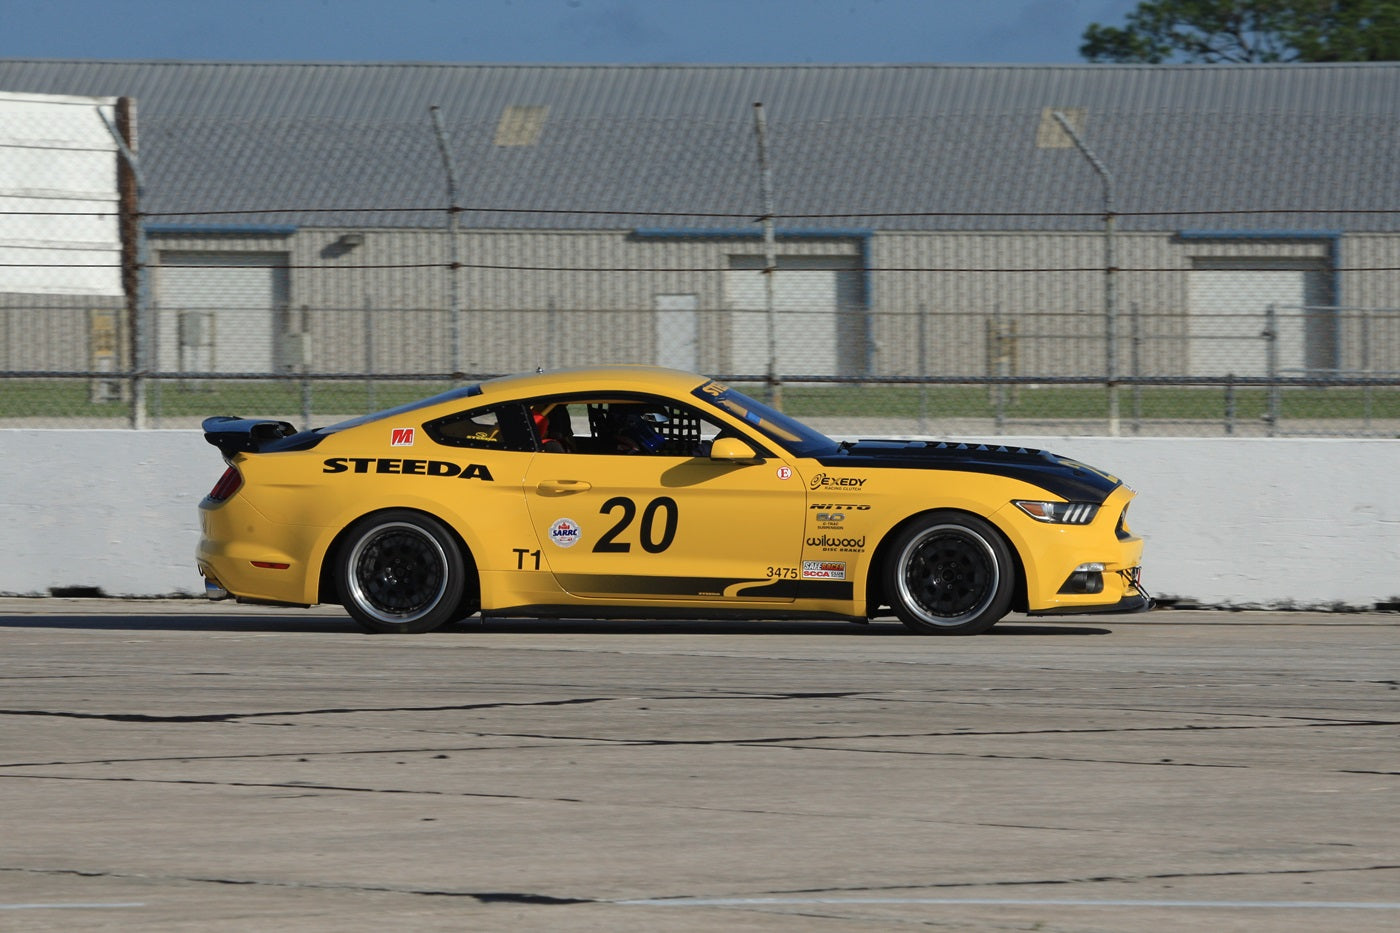 Steeda Number 20 Mustang GT race car in Track Attack mode